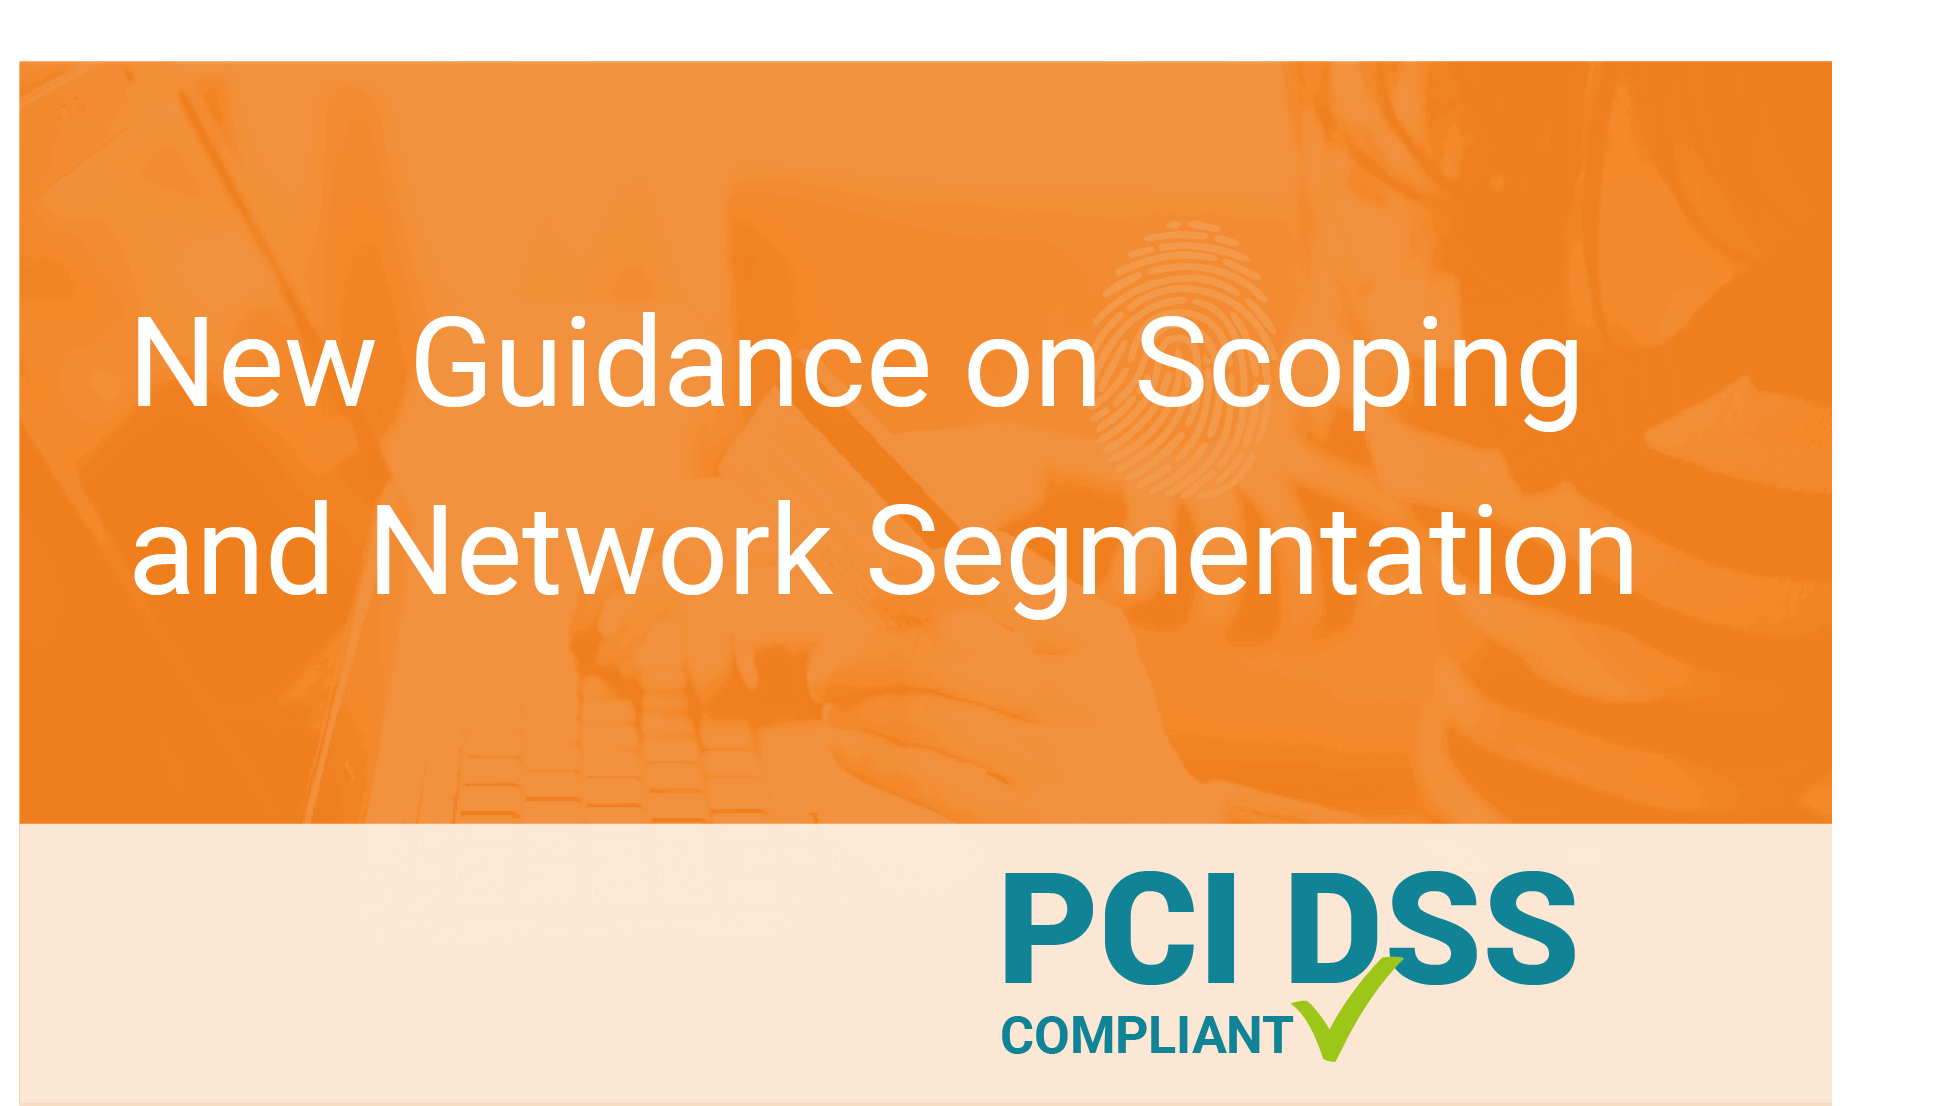 PCI DSS New Guidance on Scoping and Network Segmentation